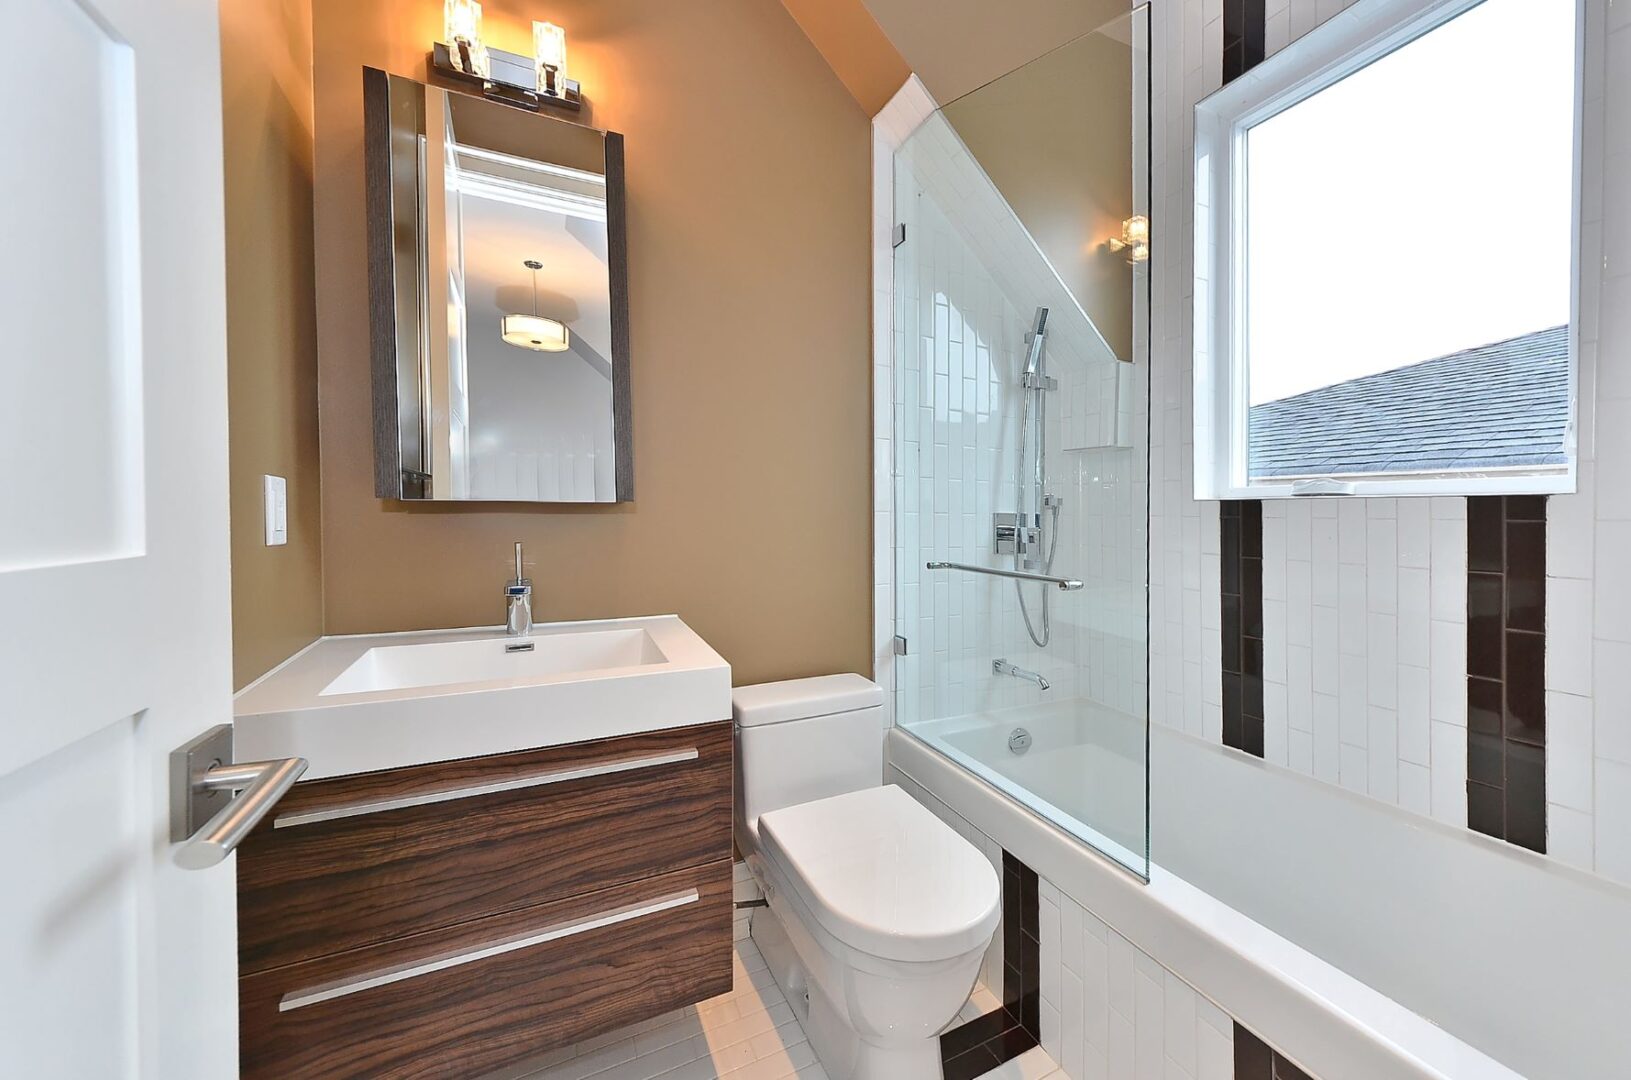 A Bathroom With White Fittings and Wood Cabinets